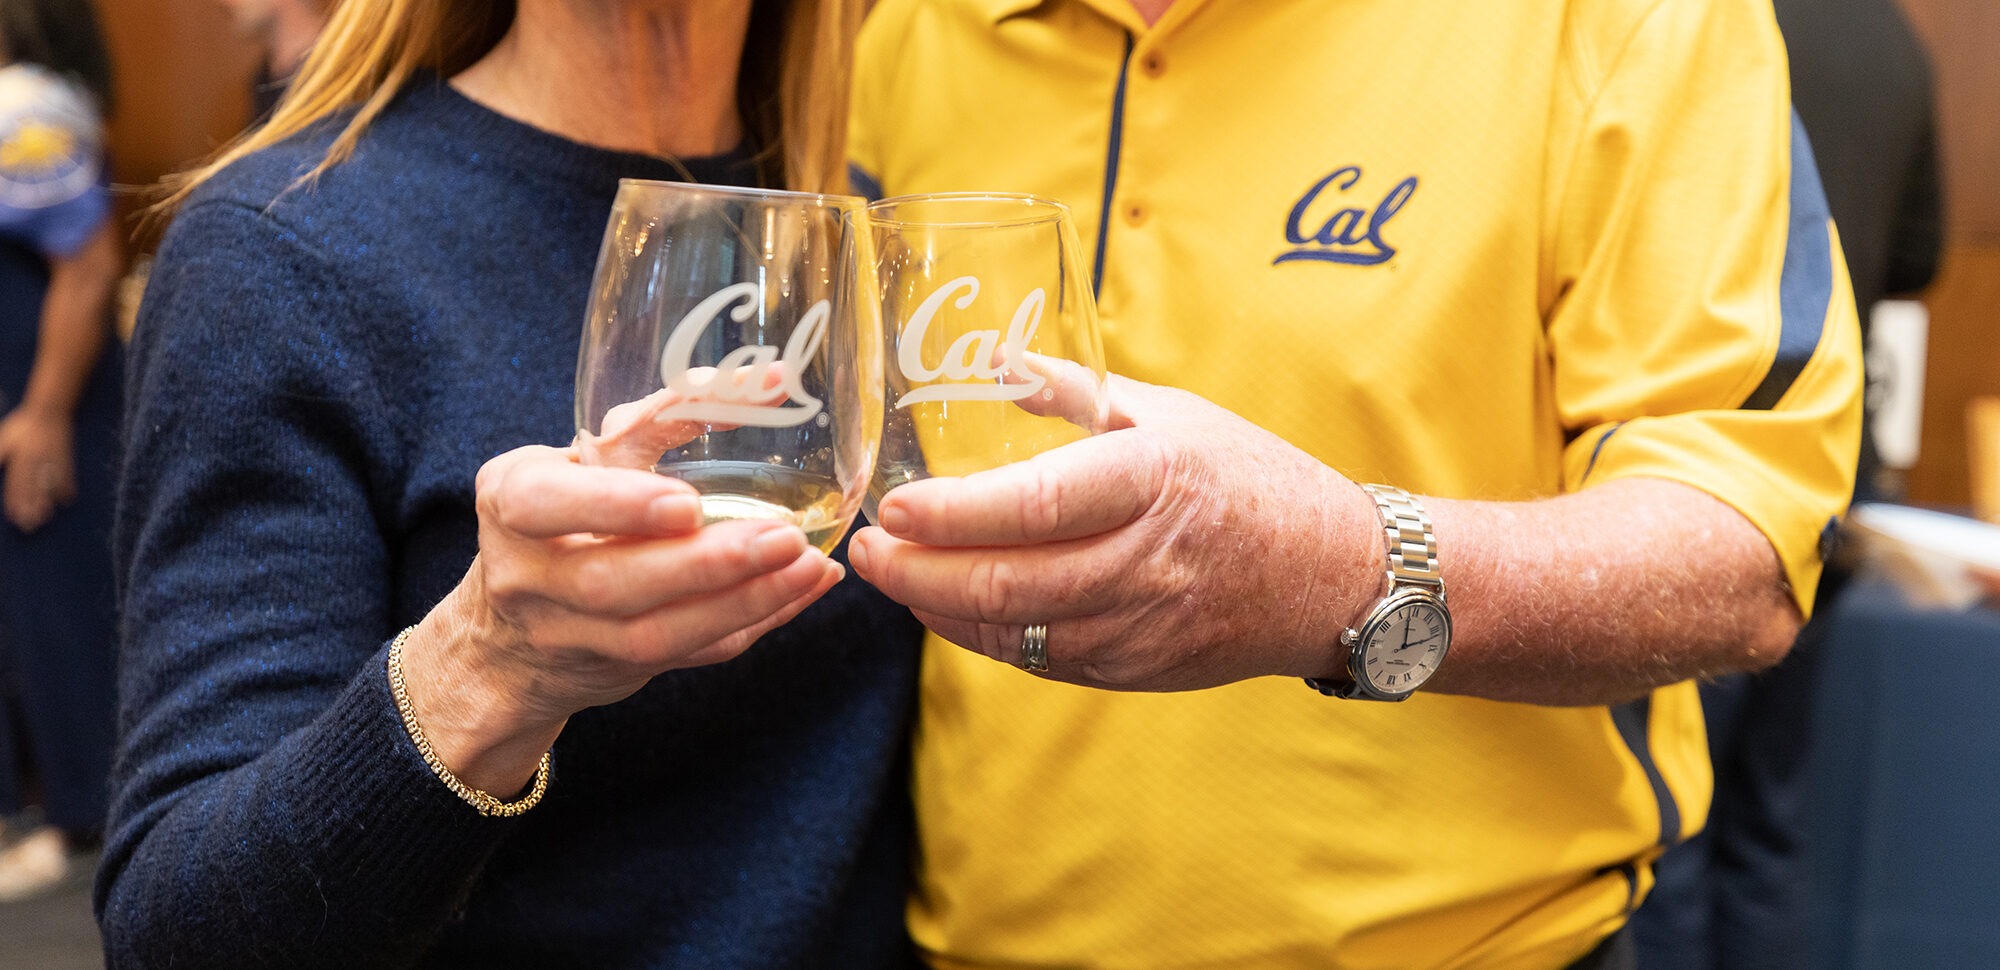 2 people toasting with Cal wine glasses and one is wearing Cal logo shirt